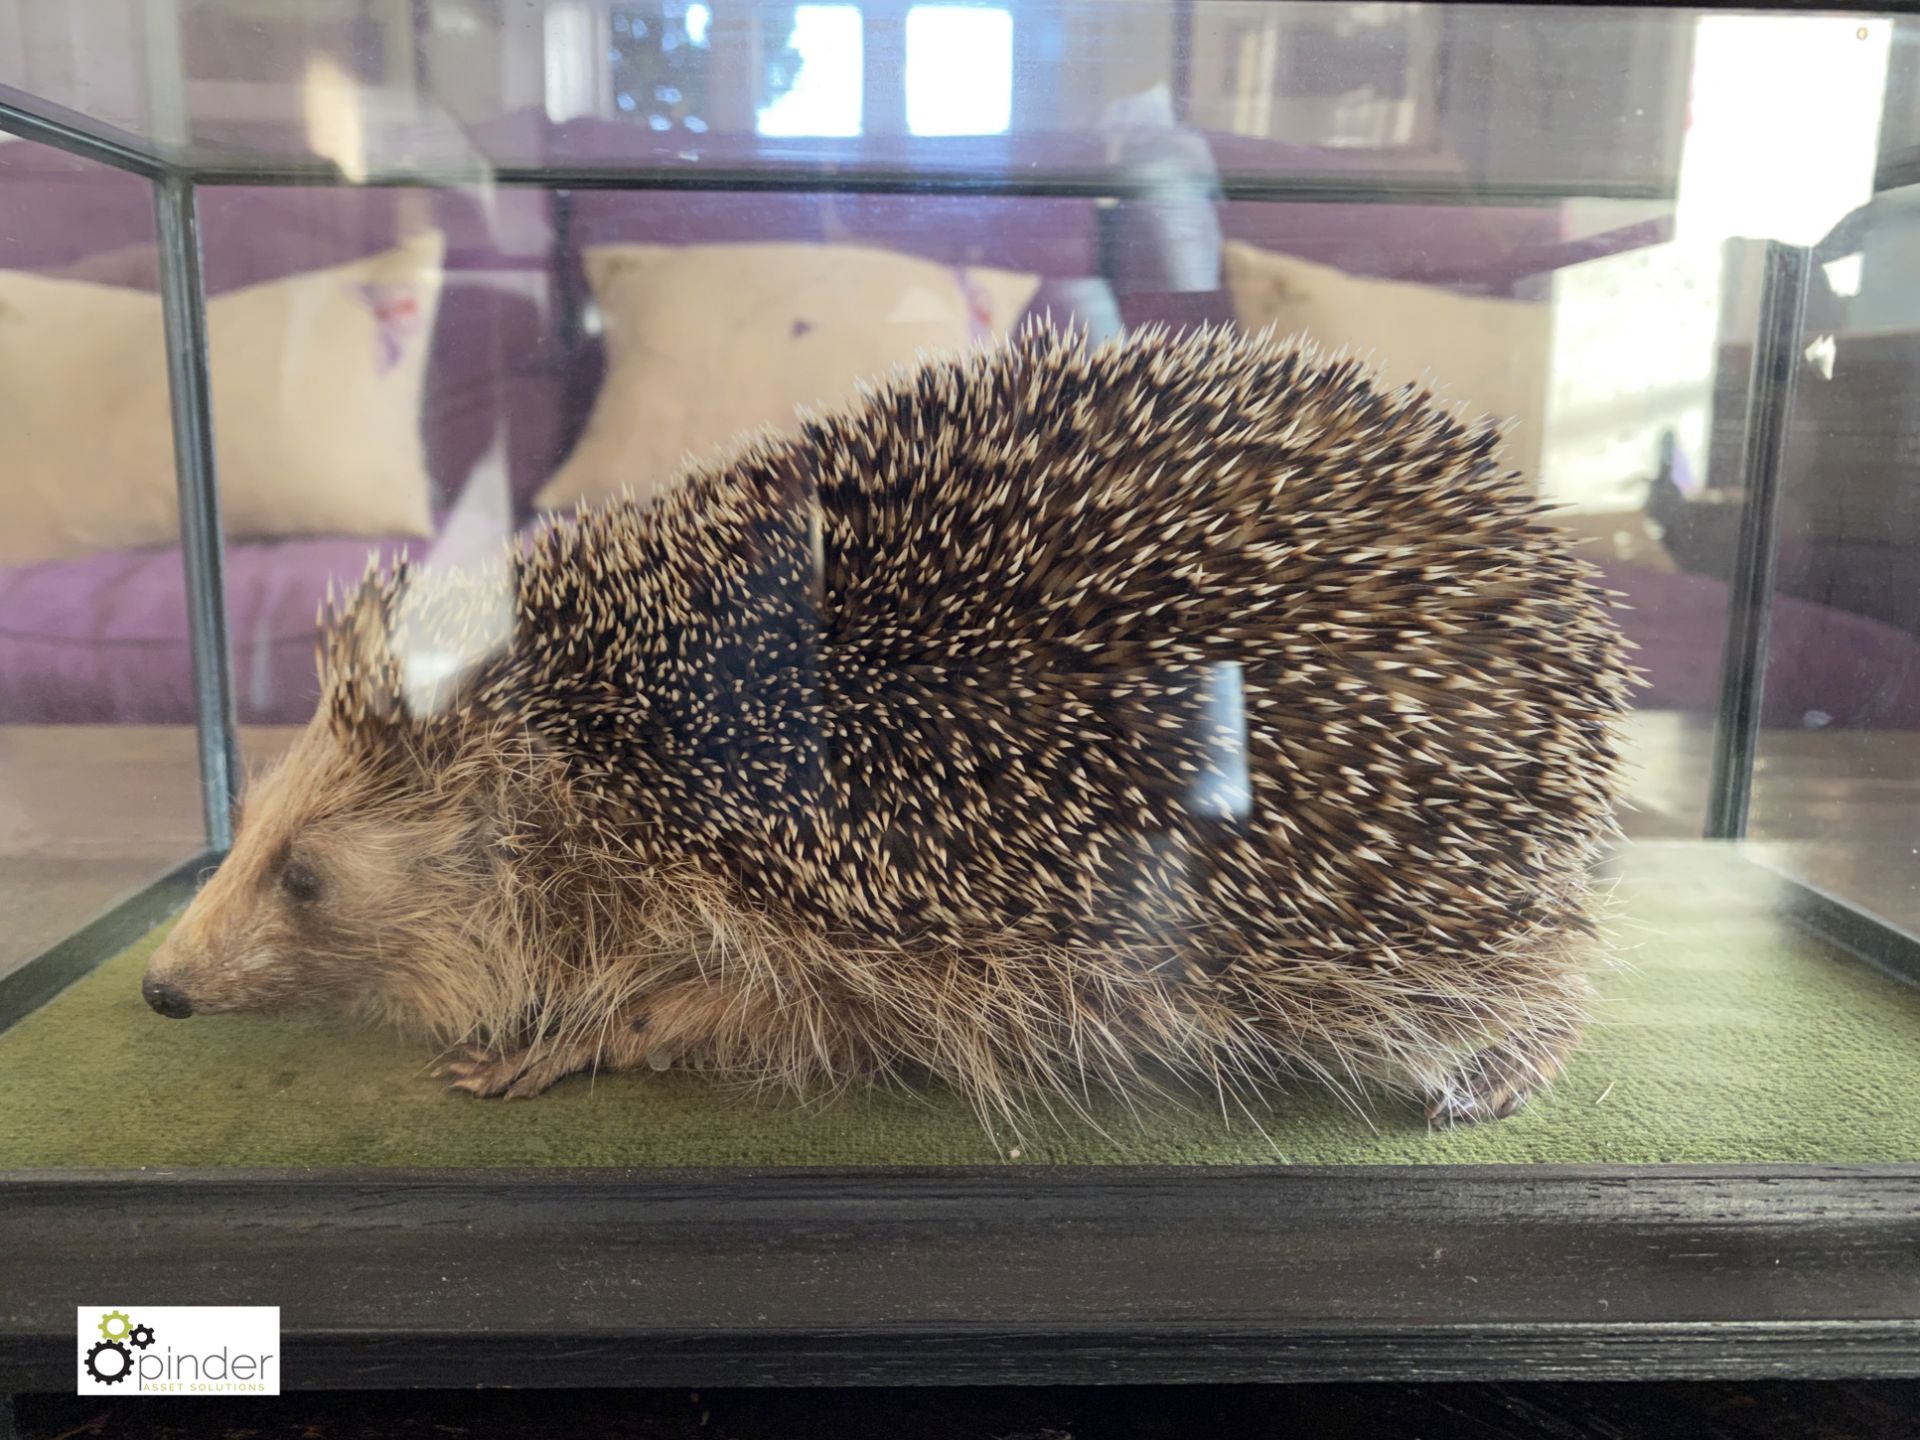 Taxidermy Hedgehog in glass case - Image 8 of 9